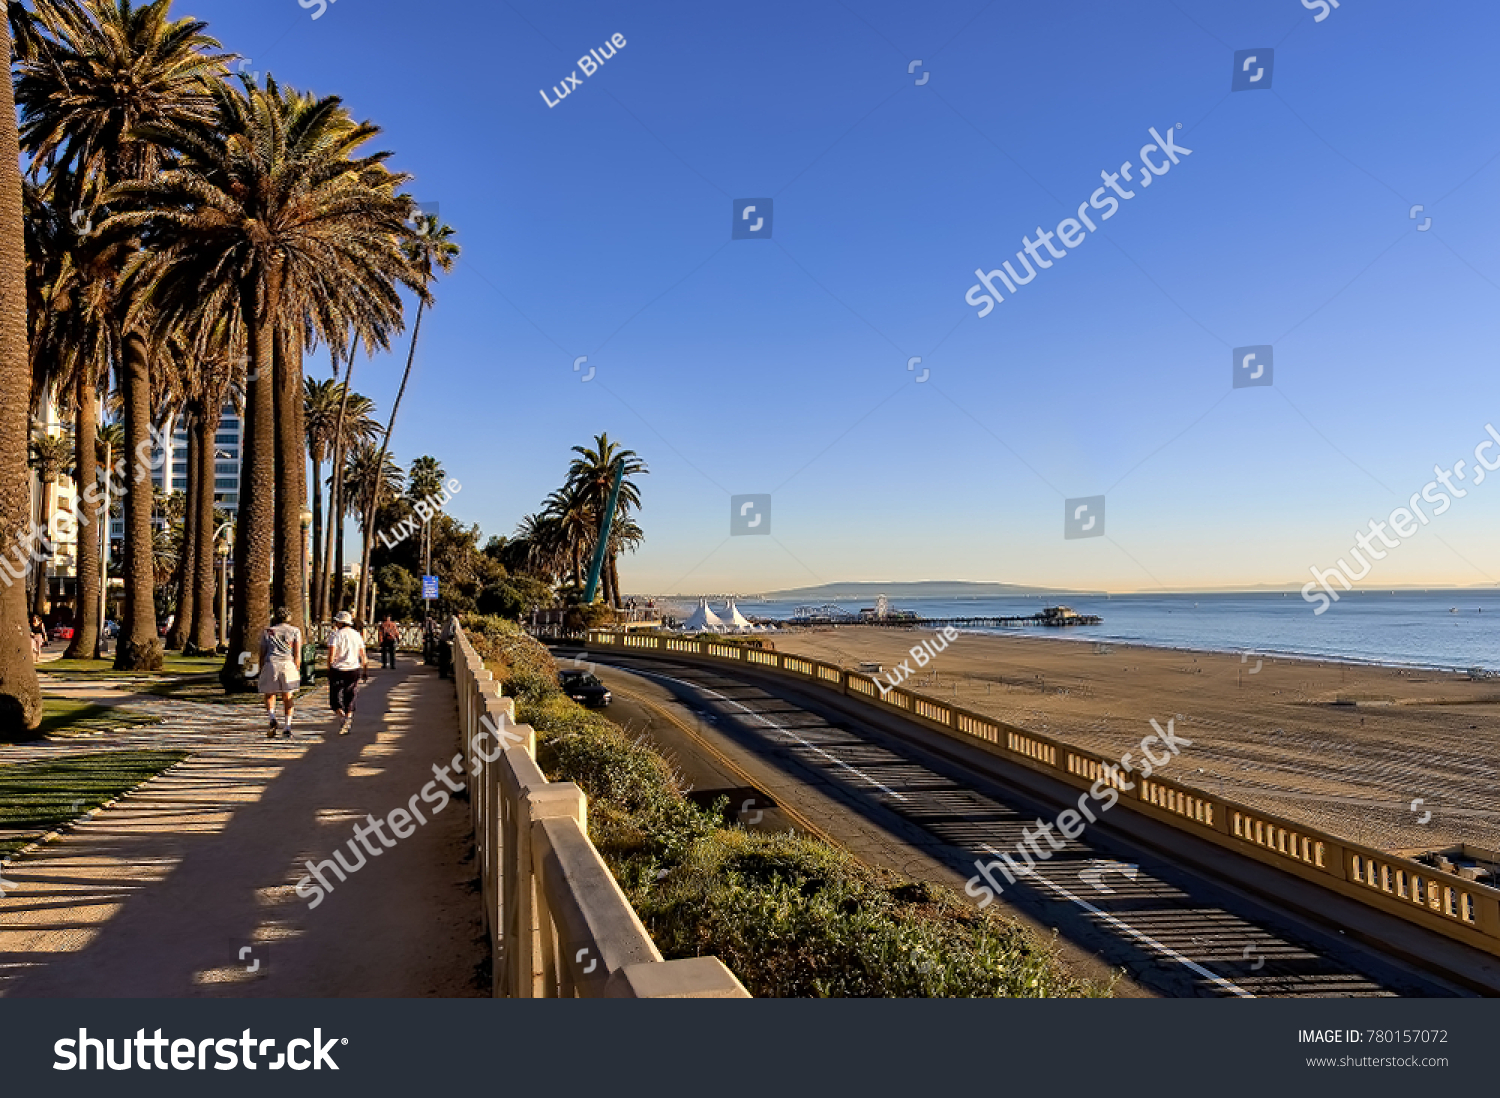 View of Santa Monica beach, California incline and Pacific Coast highway, and people walking in Palisades park. #780157072